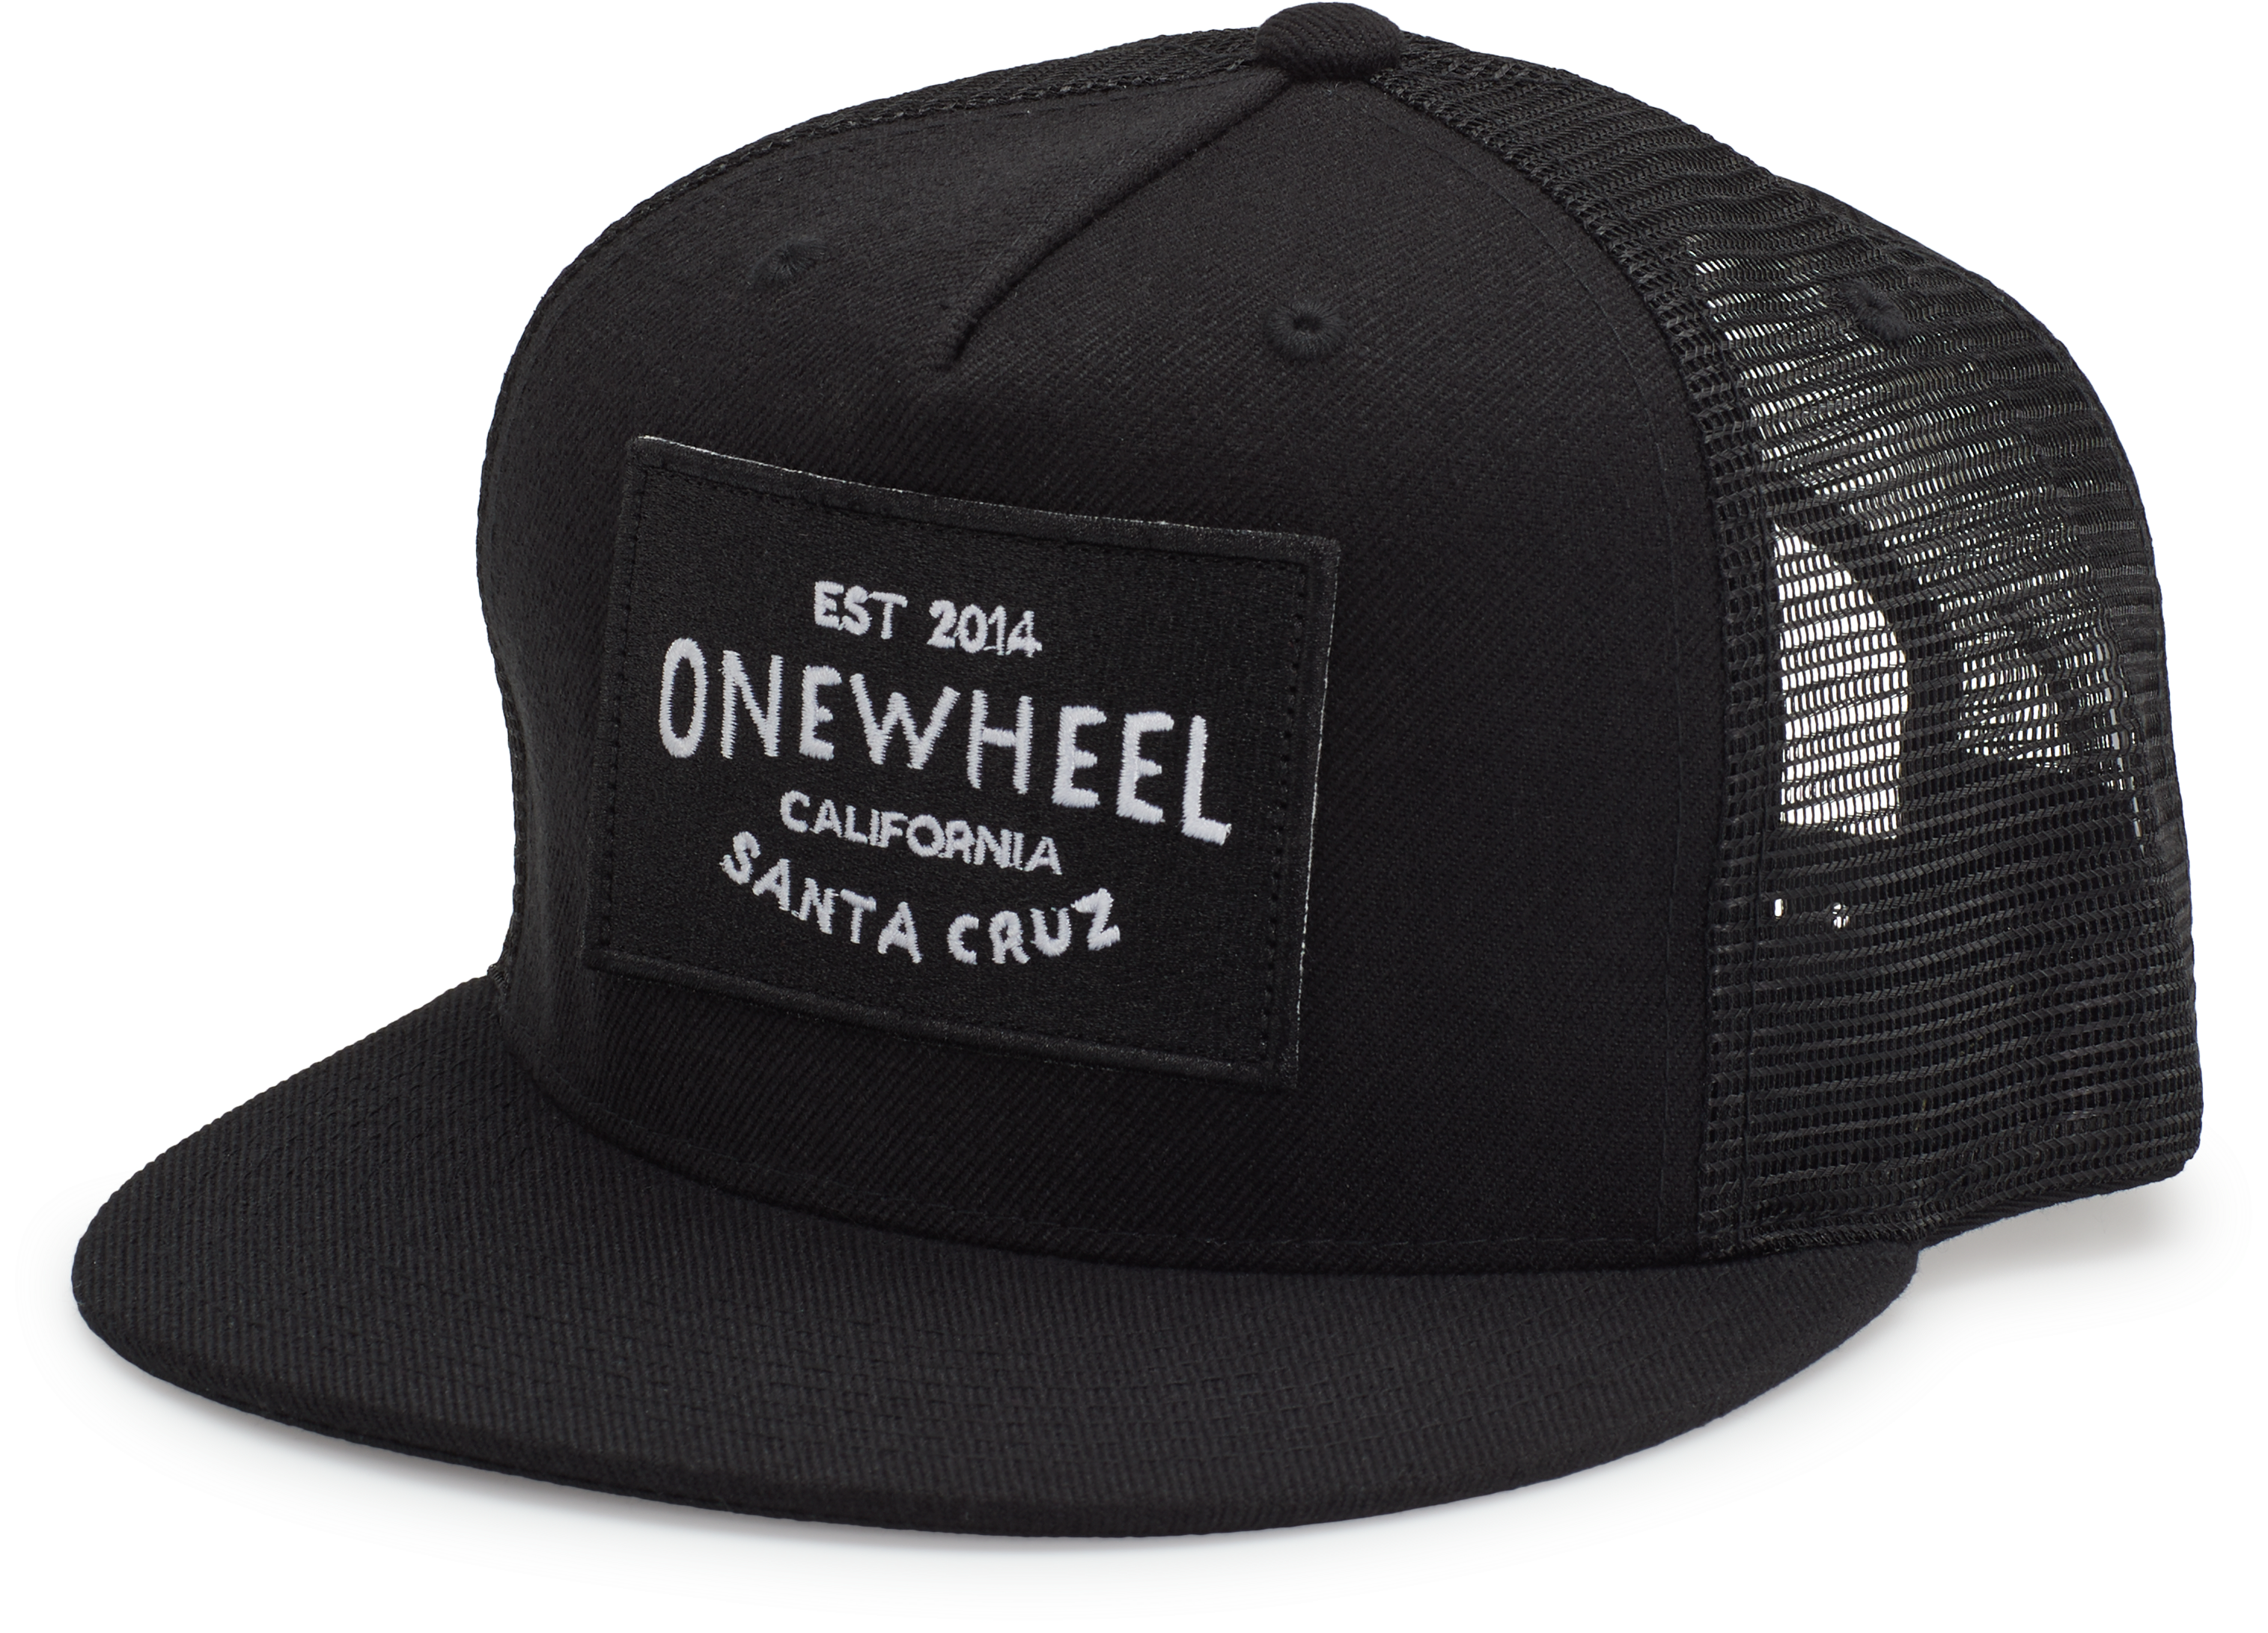 Download Onewheel Trucker Hat Trucker Hat Png Image With No Background Pngkey Com